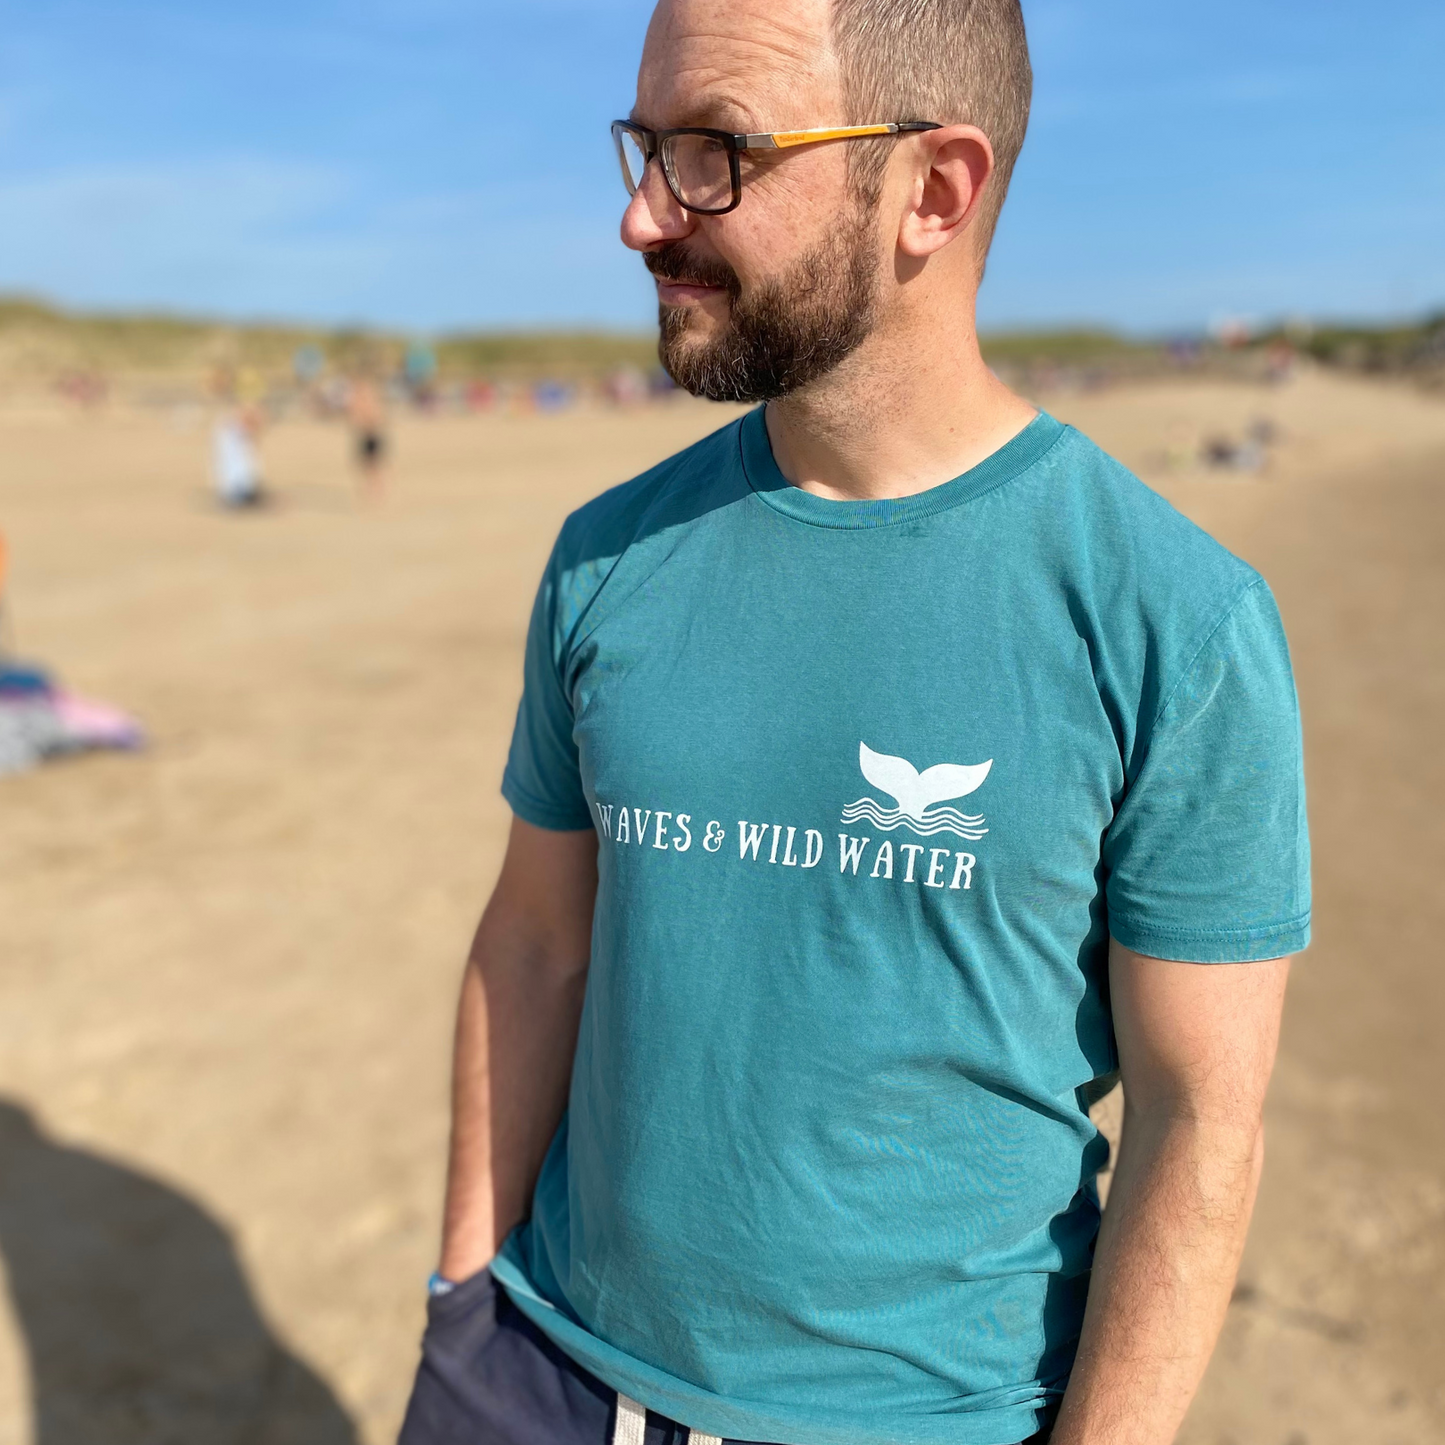 A man on a beach wearing glasses and a green Waves & Wild Water t-shirt.